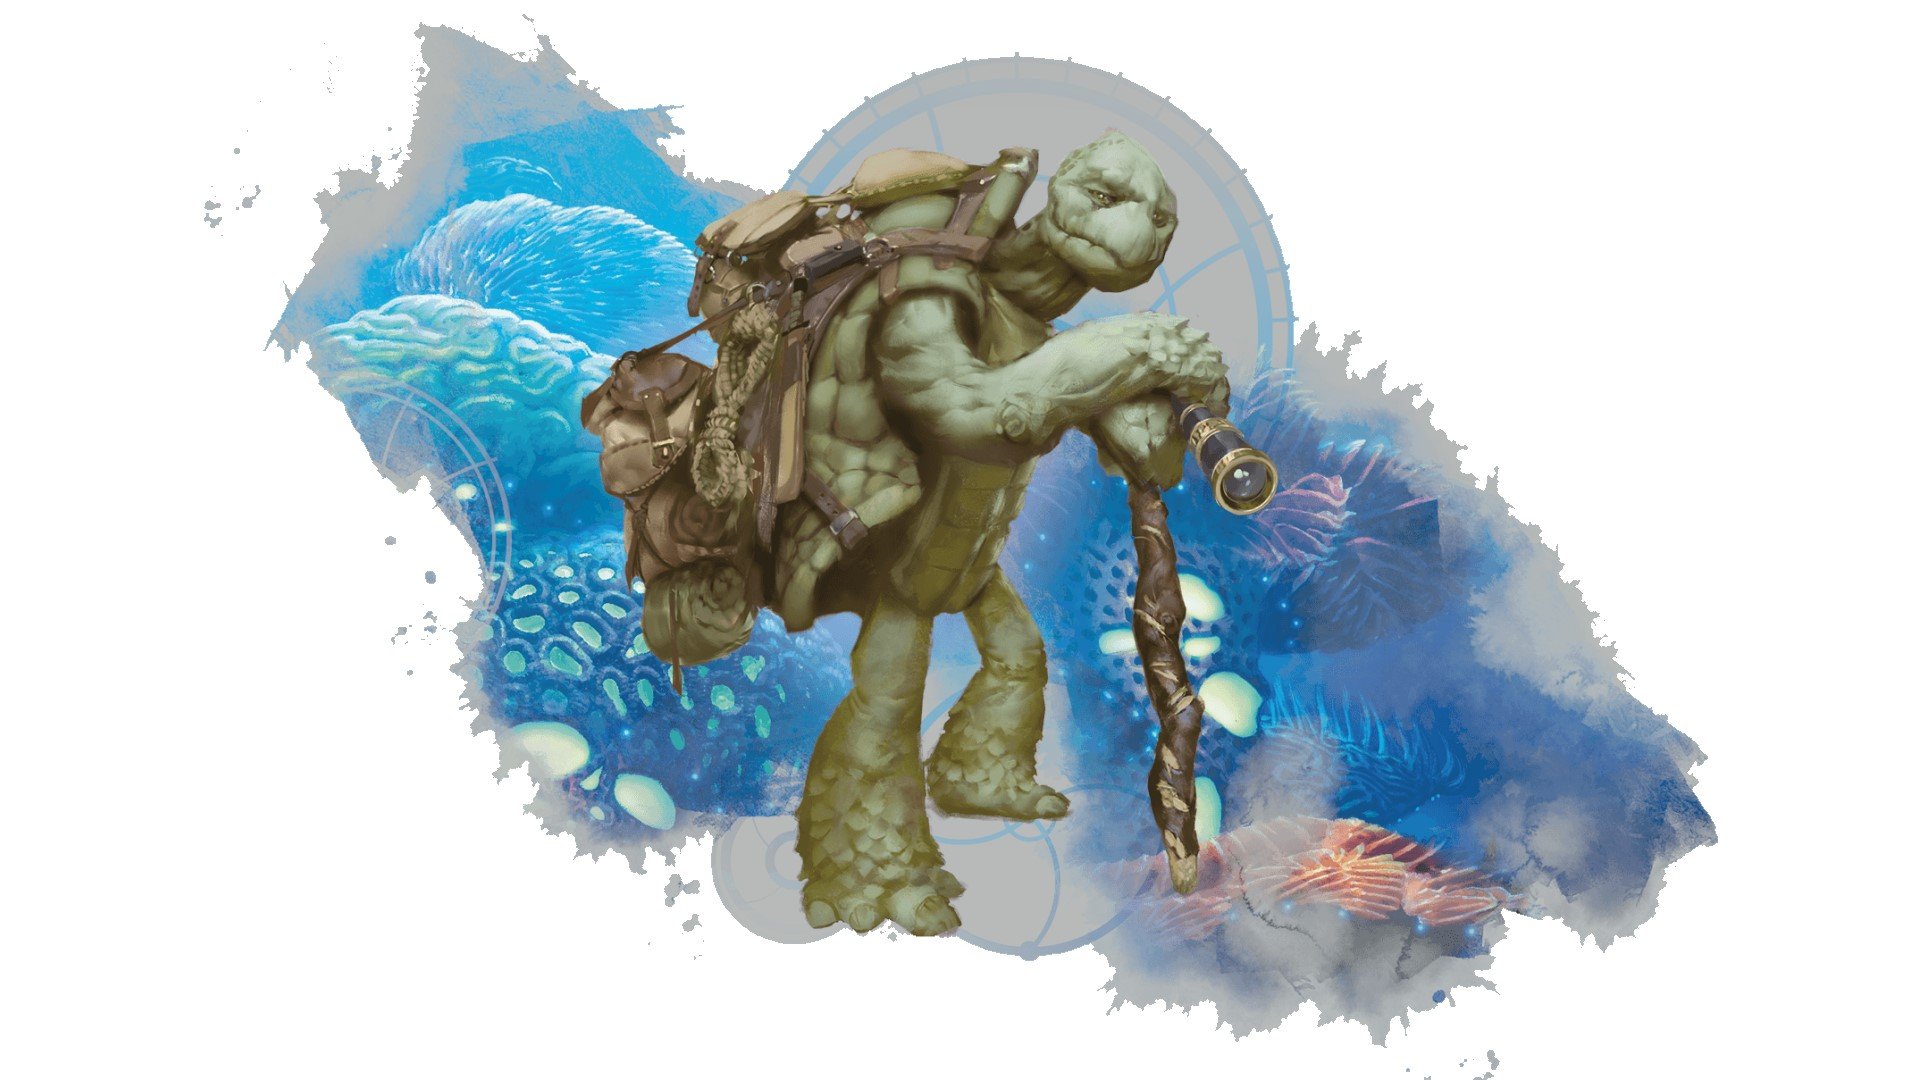 DnD Tortle 5e stands in front of a coral reef (art by Wizards of the Coast)